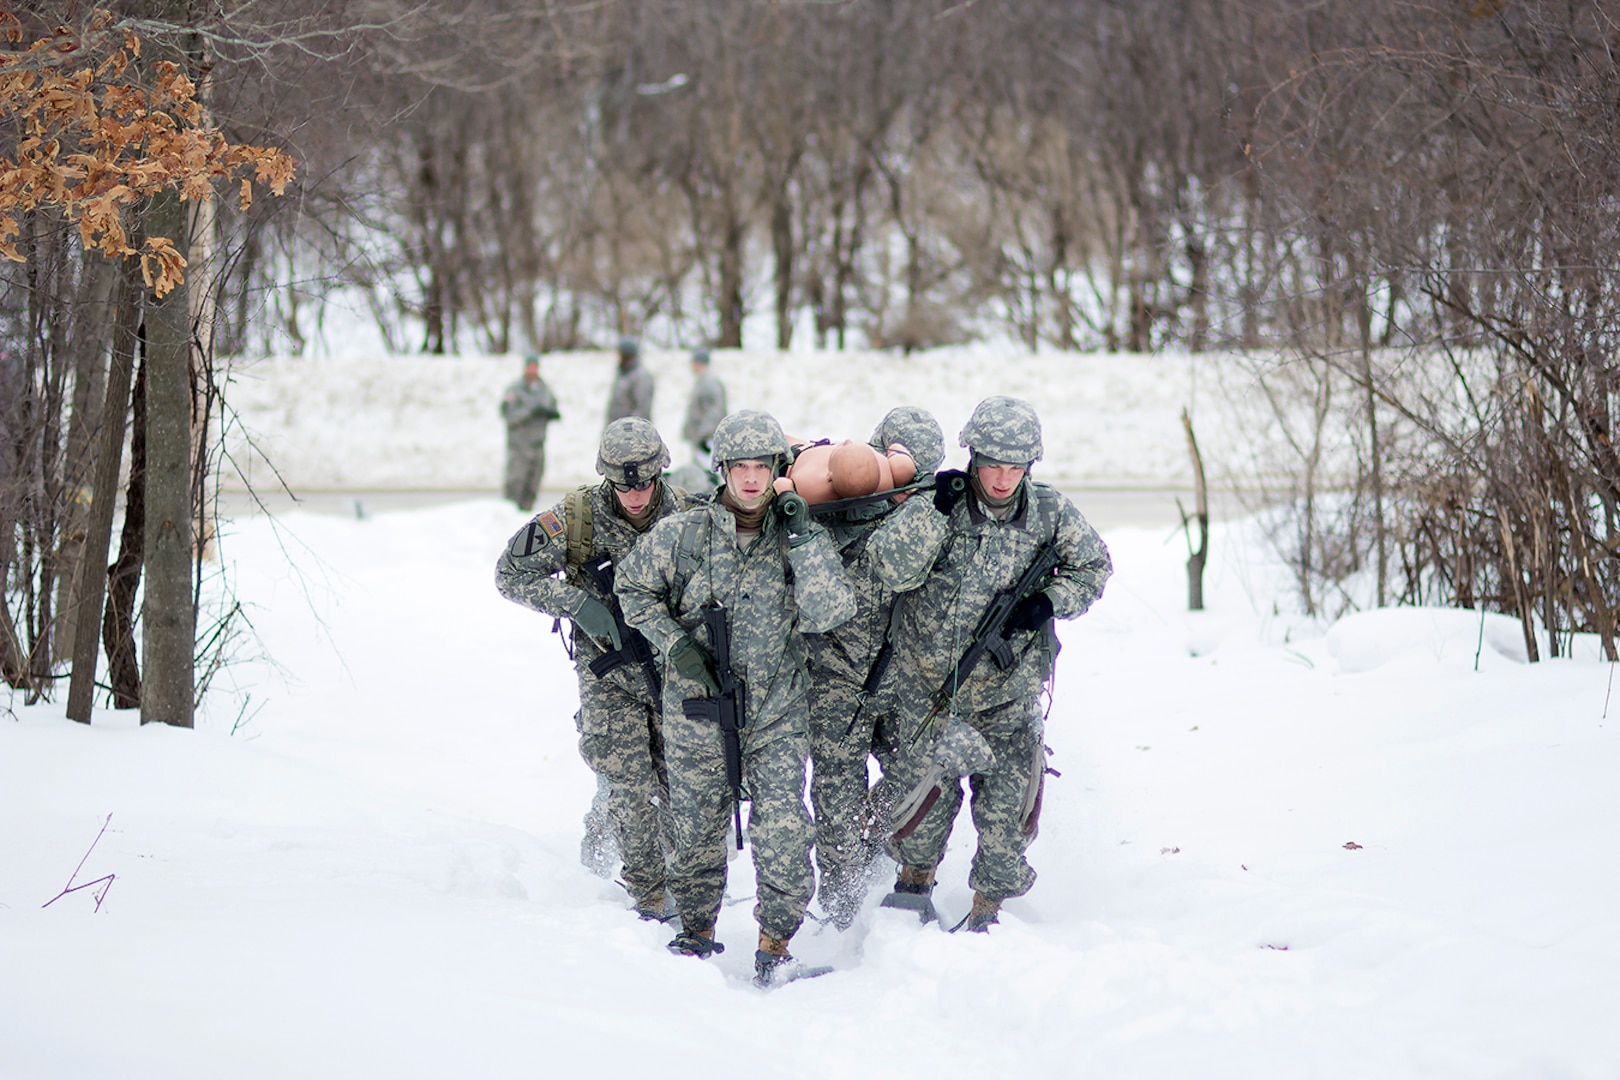 Intelligence and Sustainment Company’s team races through the snow transporting a casualty to a landing zone March 5 during the Gauntlet Challenge at Fort Drum.
